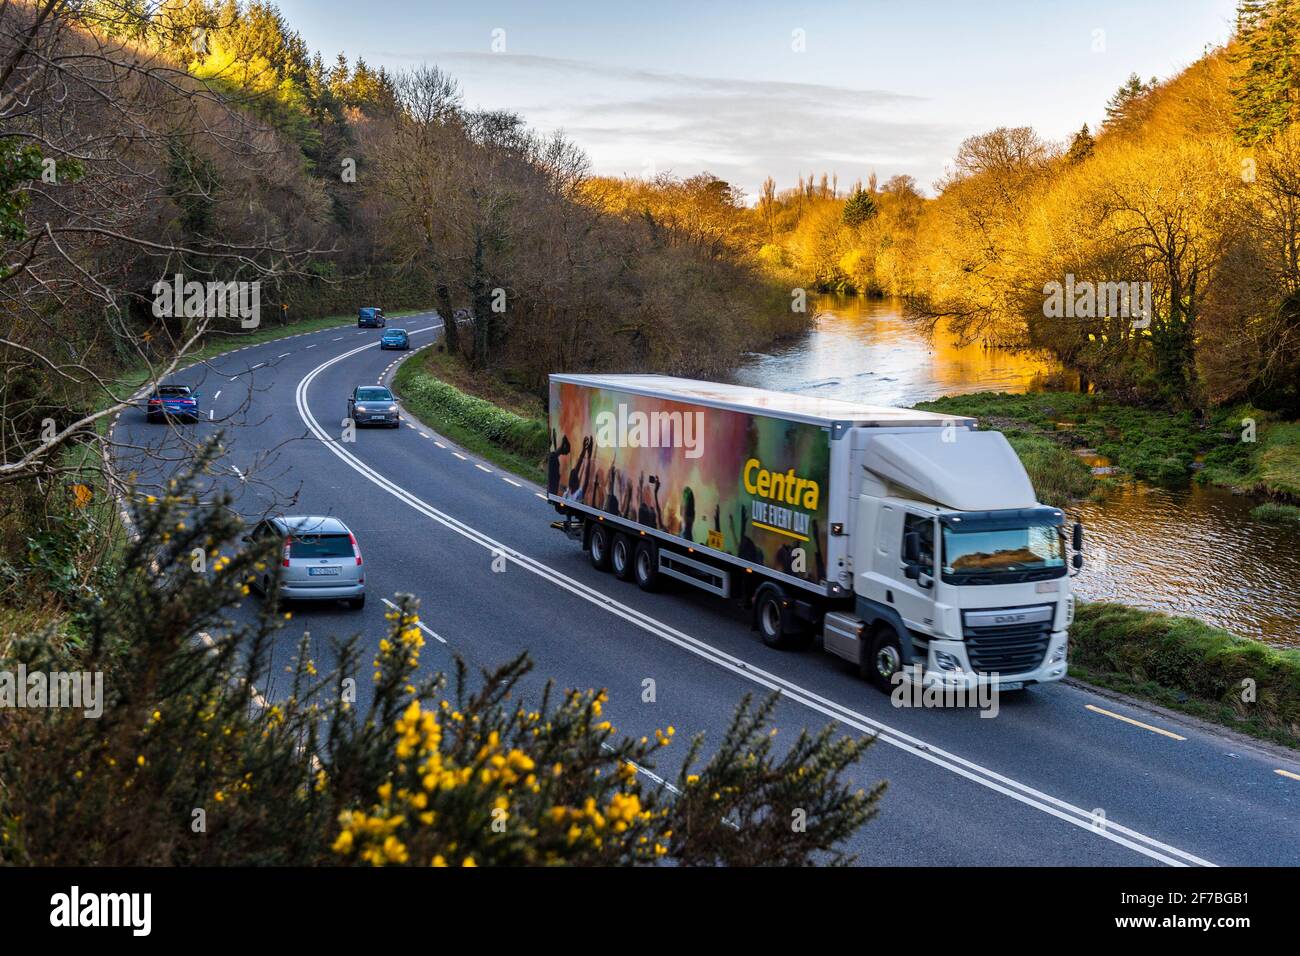 Innishannon, West Cork, Ireland. 6th Apr, 2021. The N71 near Innishannon was busy this morning, despite the country experiencing continuing Level 5 Lockdown restrictions. Some restrictions are expected to be lifted on 12th April. Credit: AG News/Alamy Live News Stock Photo